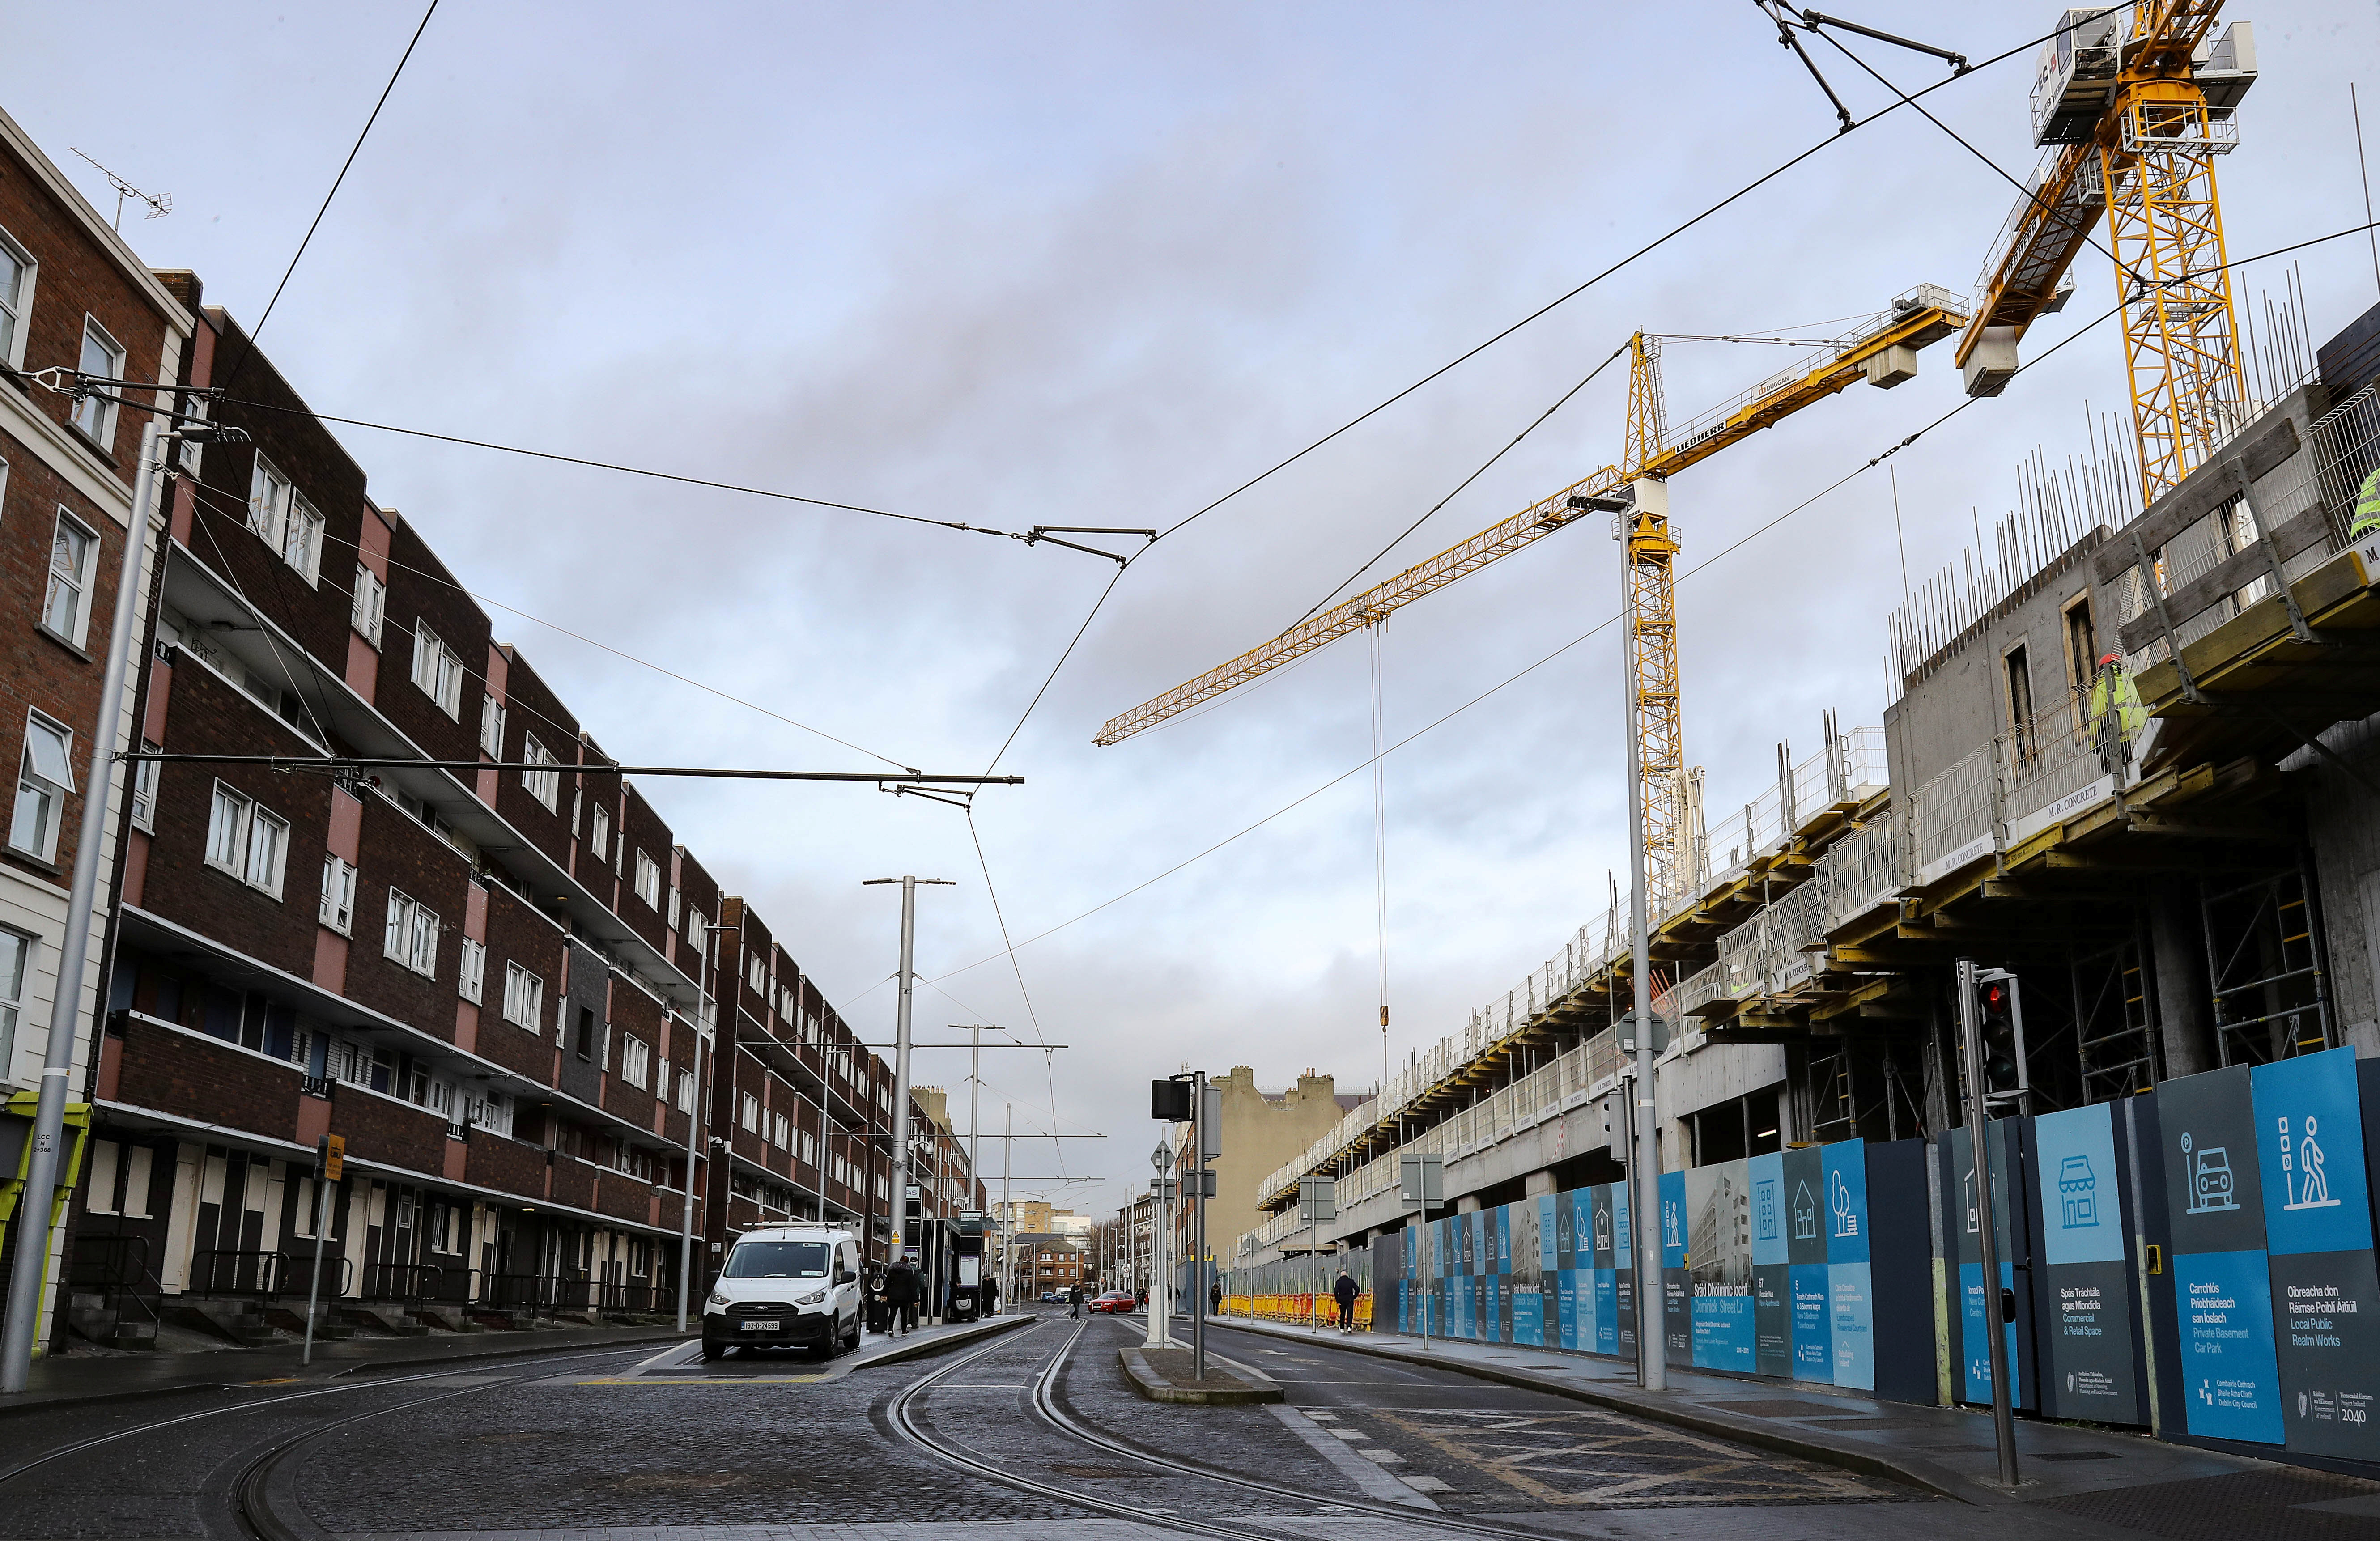 A new development under construction on Dominick Street Lower, faces old council flats in Dublin, Ireland January 30, 2020. REUTERS/Lorraine O'Sullivan